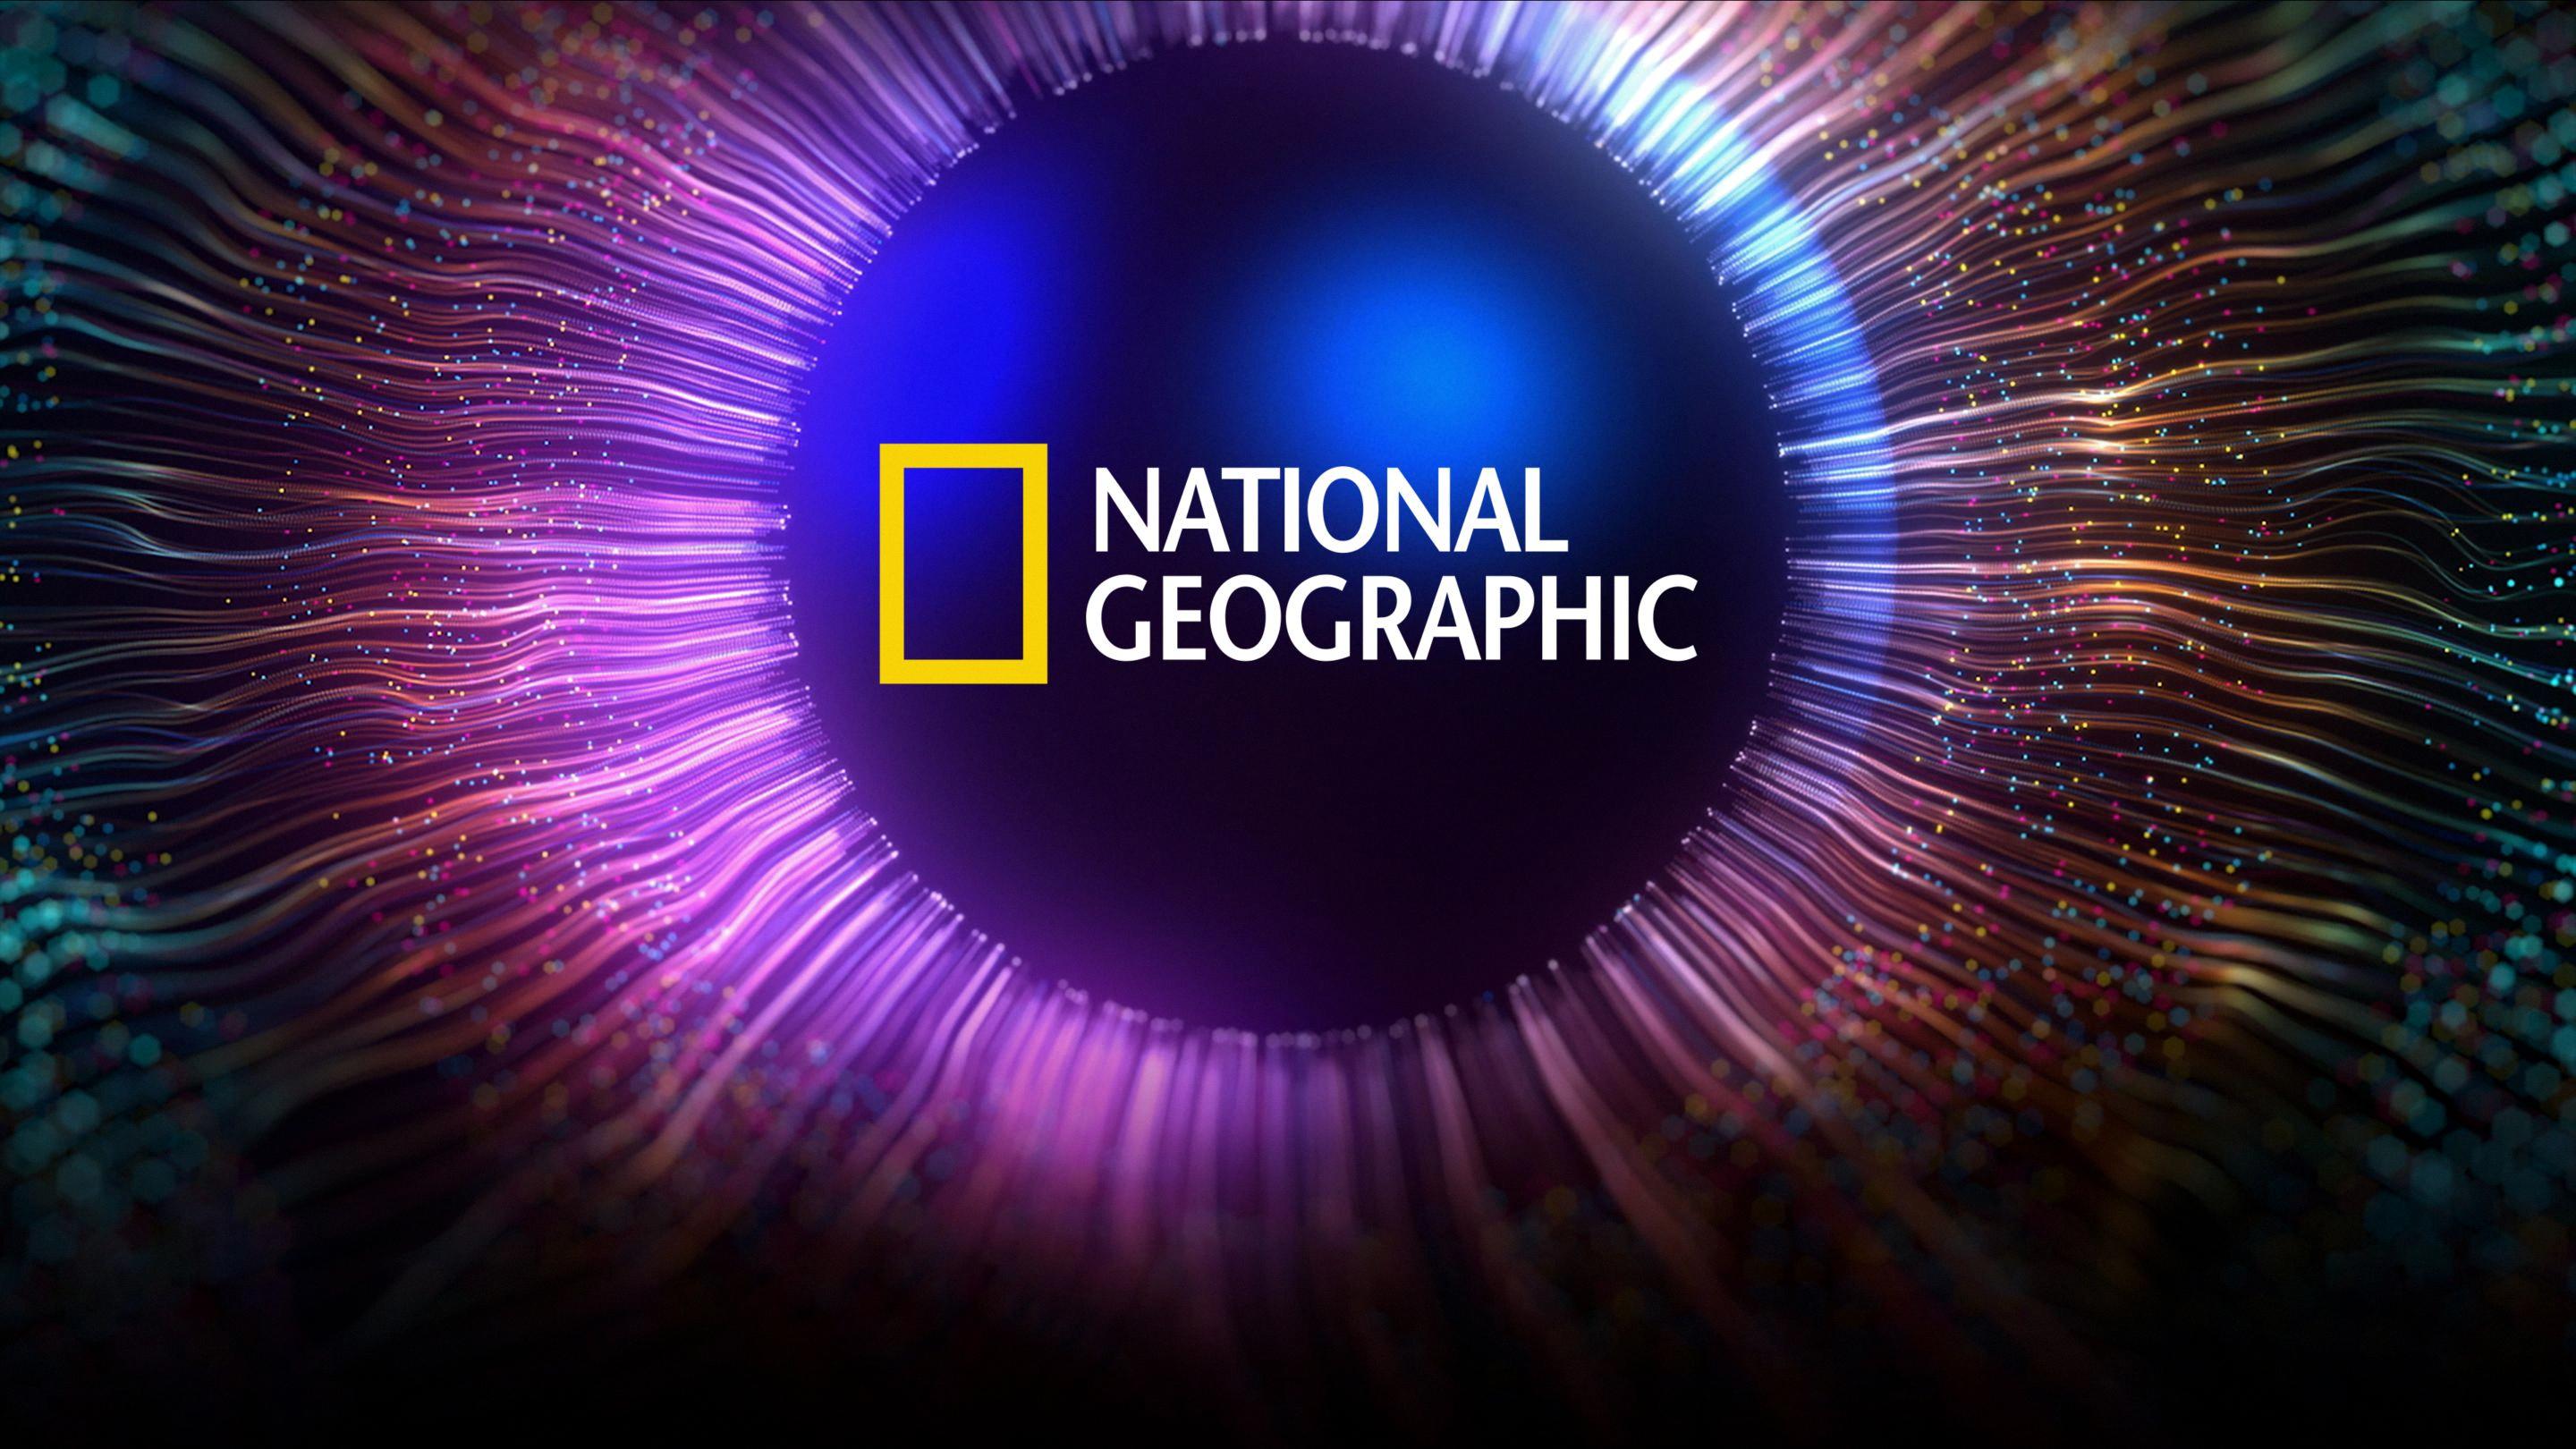 does disney own national geographic